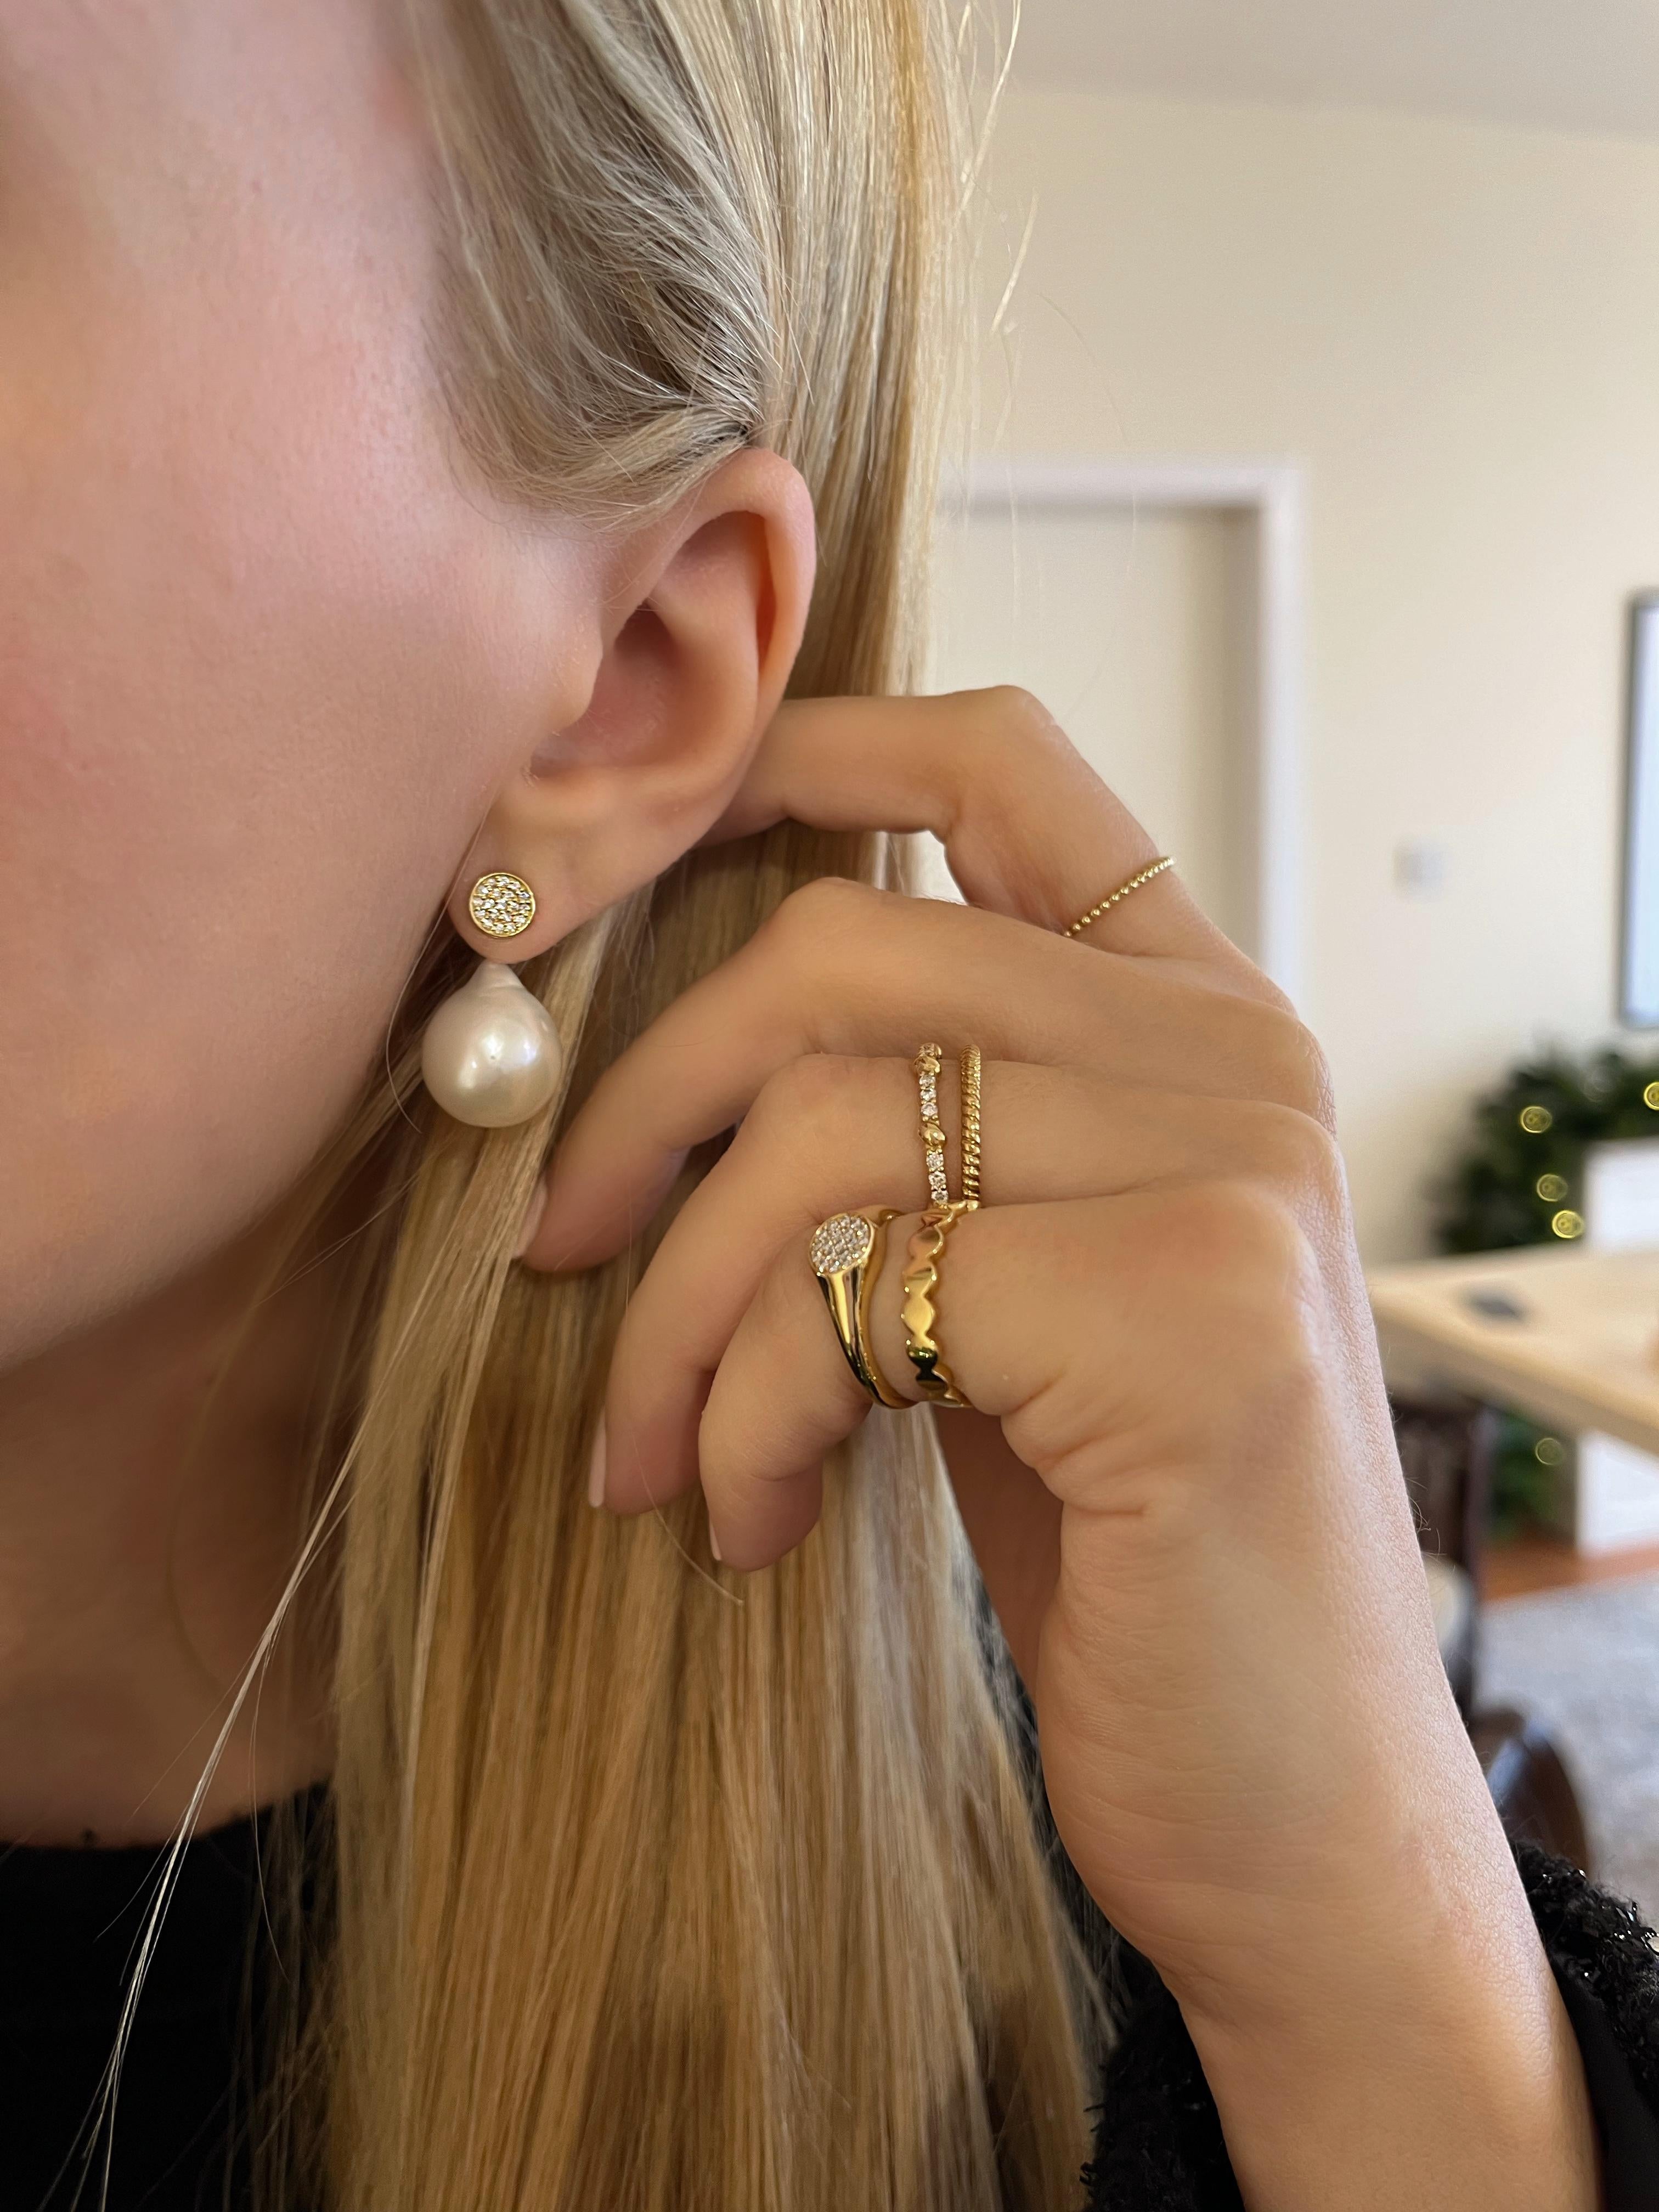 Our ‘Diamond Disk Earrings’ by Michelle Massoura feature a pair of glimmering diamond disks (width 7mm), set in 18Karat Gold and detachable baroque pearls. The diamond disk studs can be worn on their own as the perfect everyday luxury stud earring,